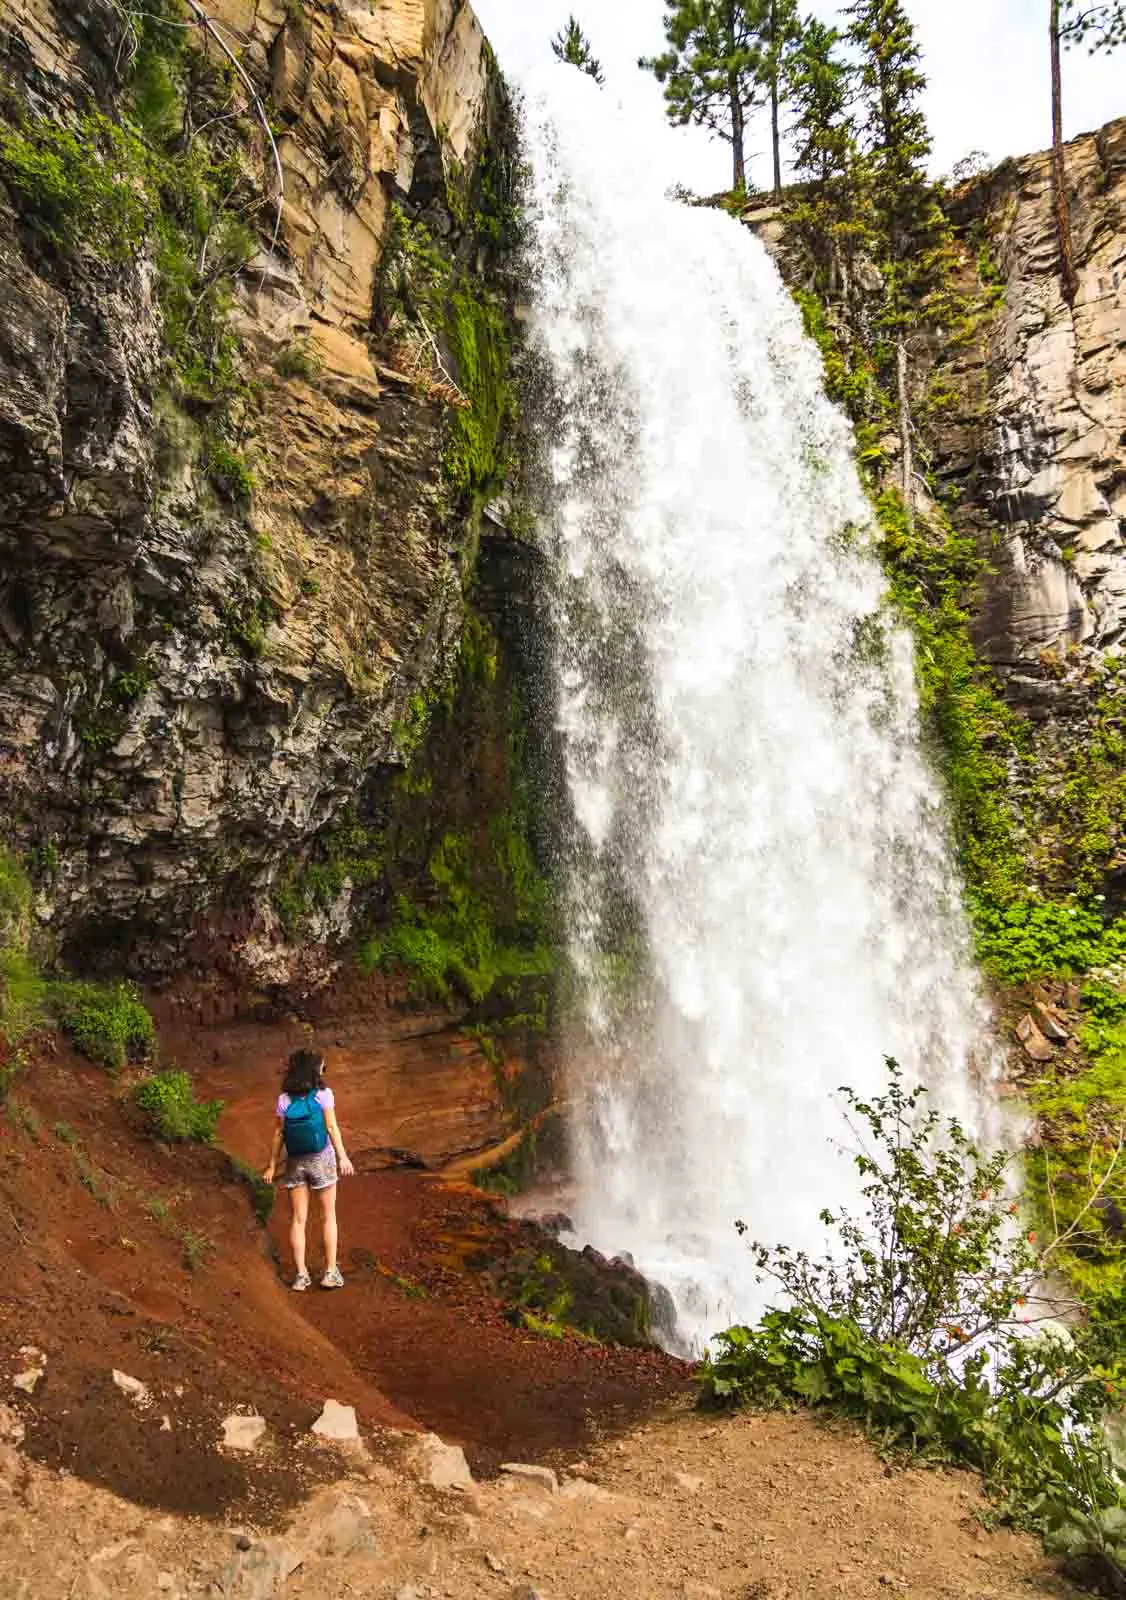 Don’t forget to add Tumalo Falls to your list of things to do in Bend